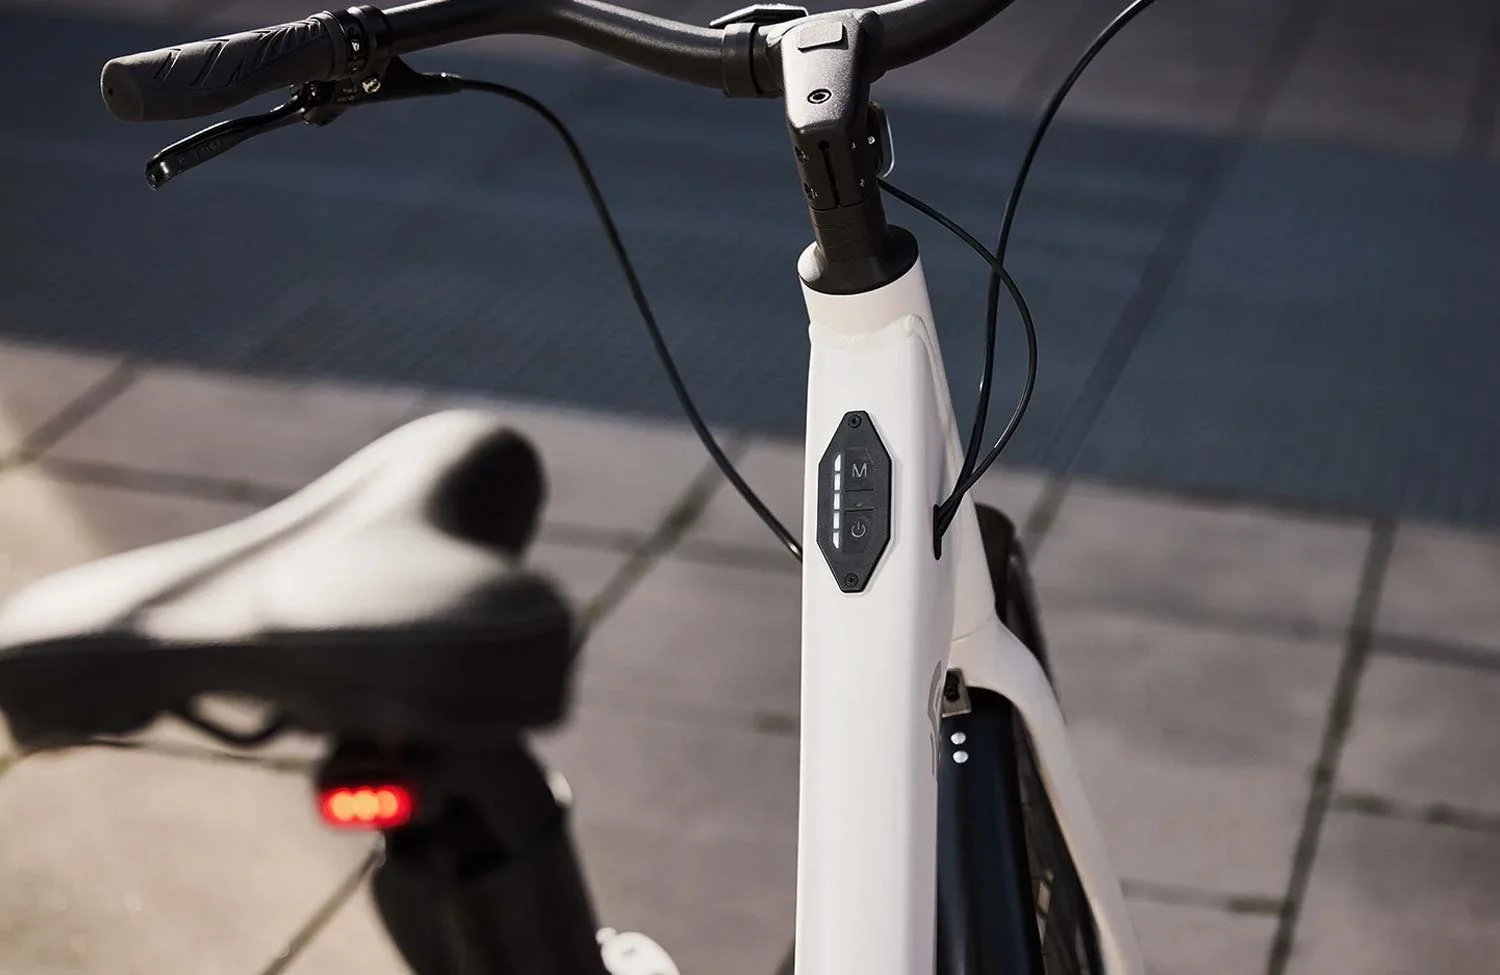 An urban e-bike from we take from look — bike the the discounter: a Crivit at Lidl new